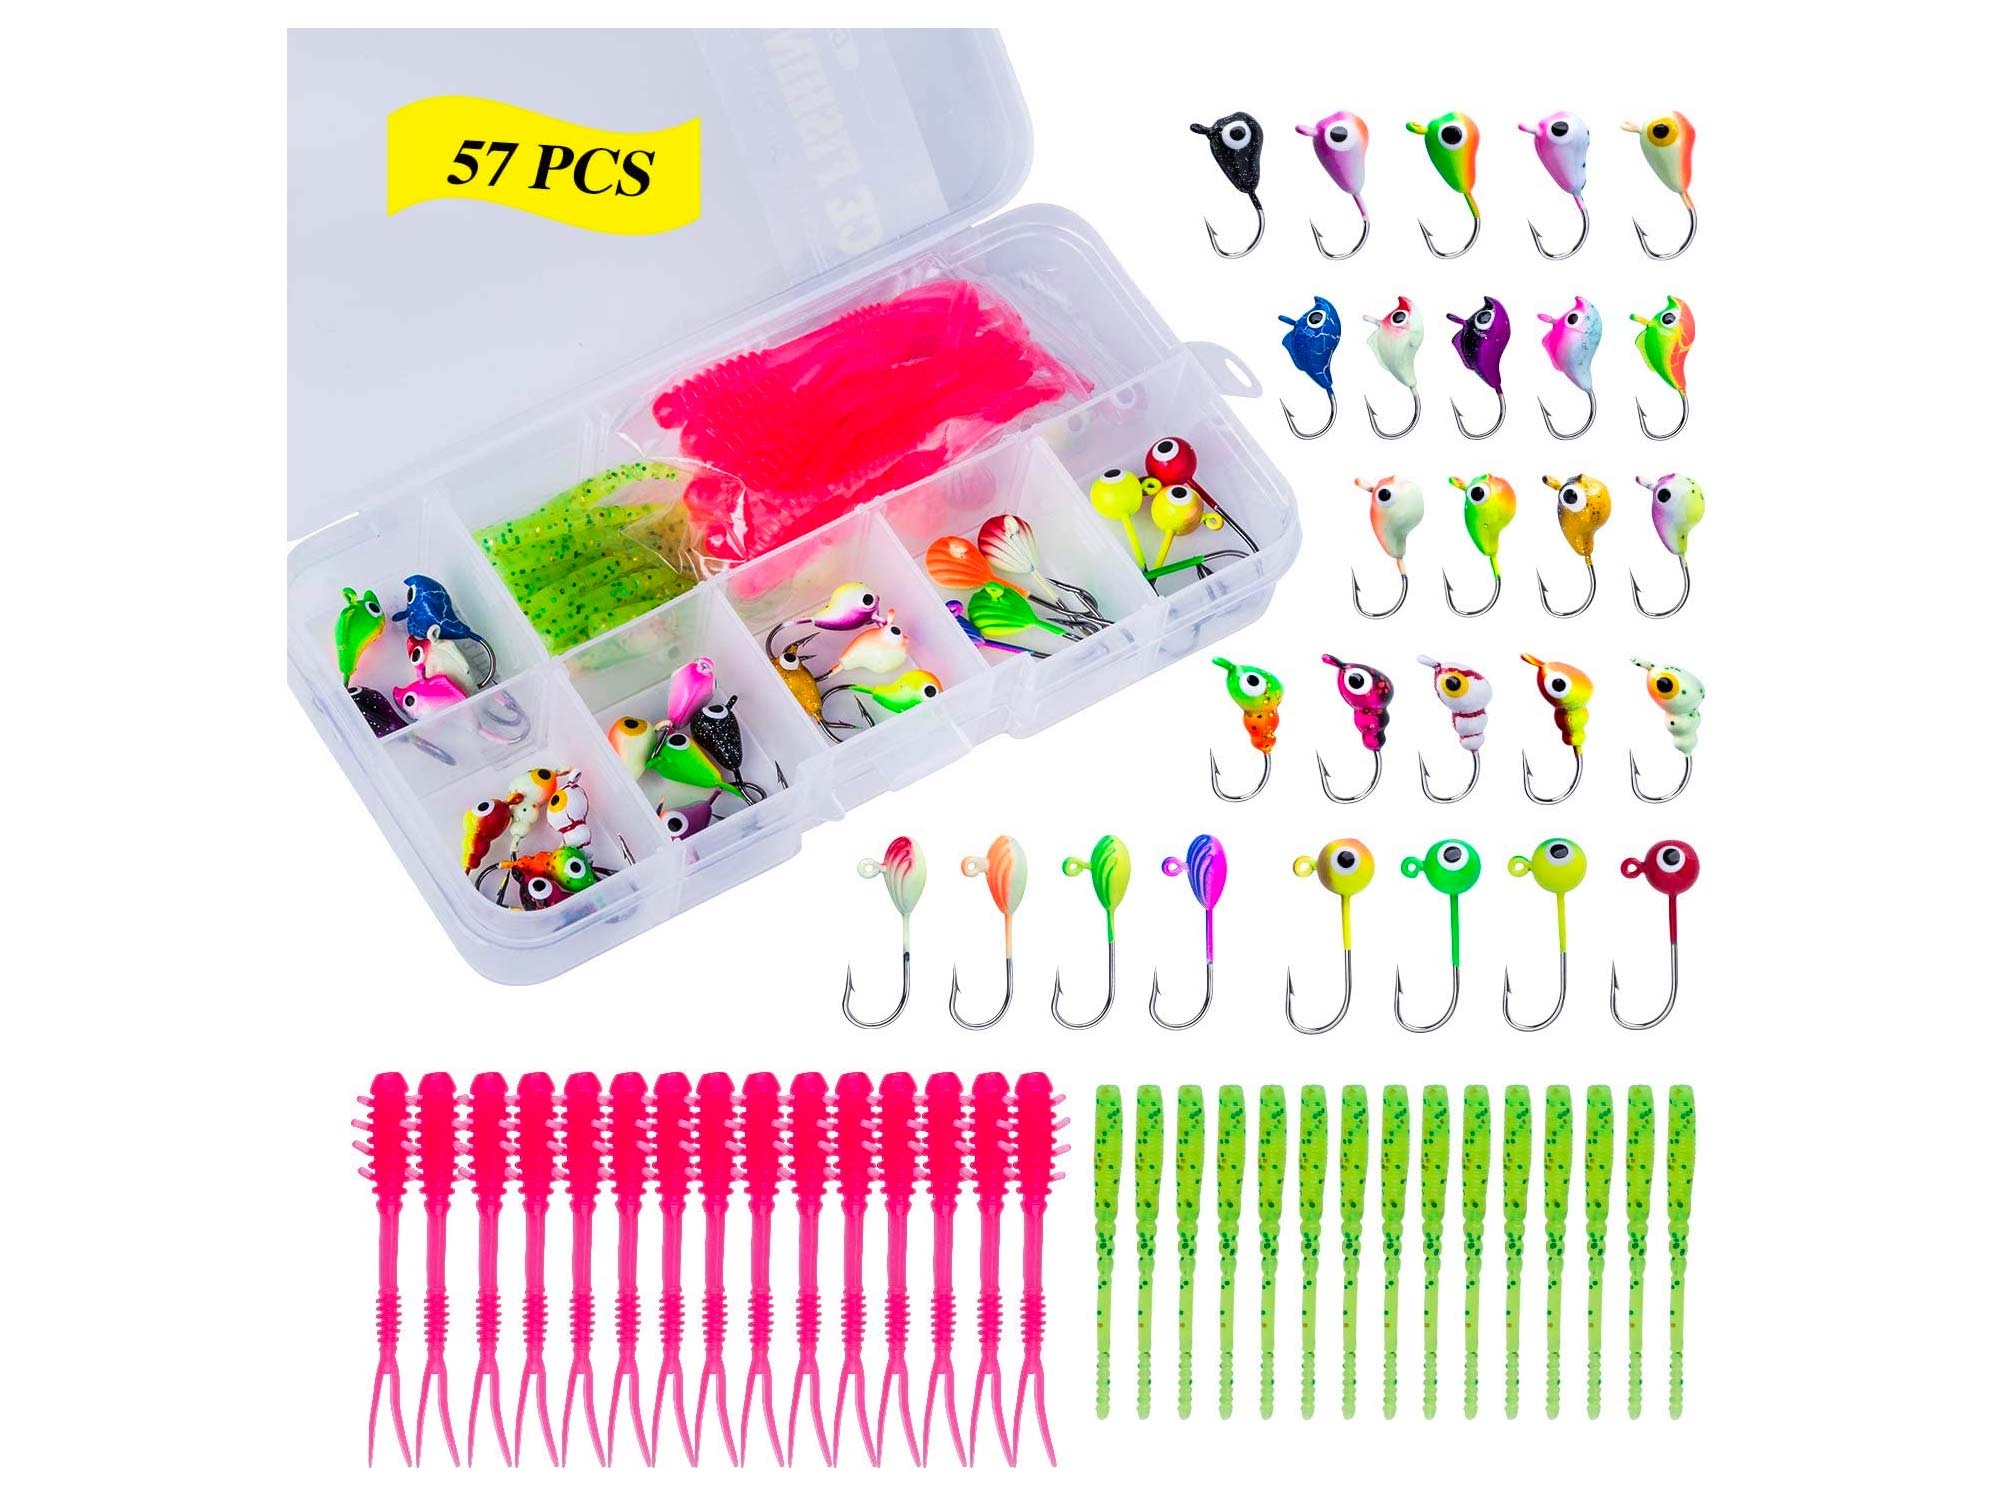 Goture Ice Fishing Jigs Tungsten Kit with Carbon Steel Hooks in Tackle Box, Winter Ice Fishing Lures for Bass Pike Trout Walleye Crappie, Trout, Panfish